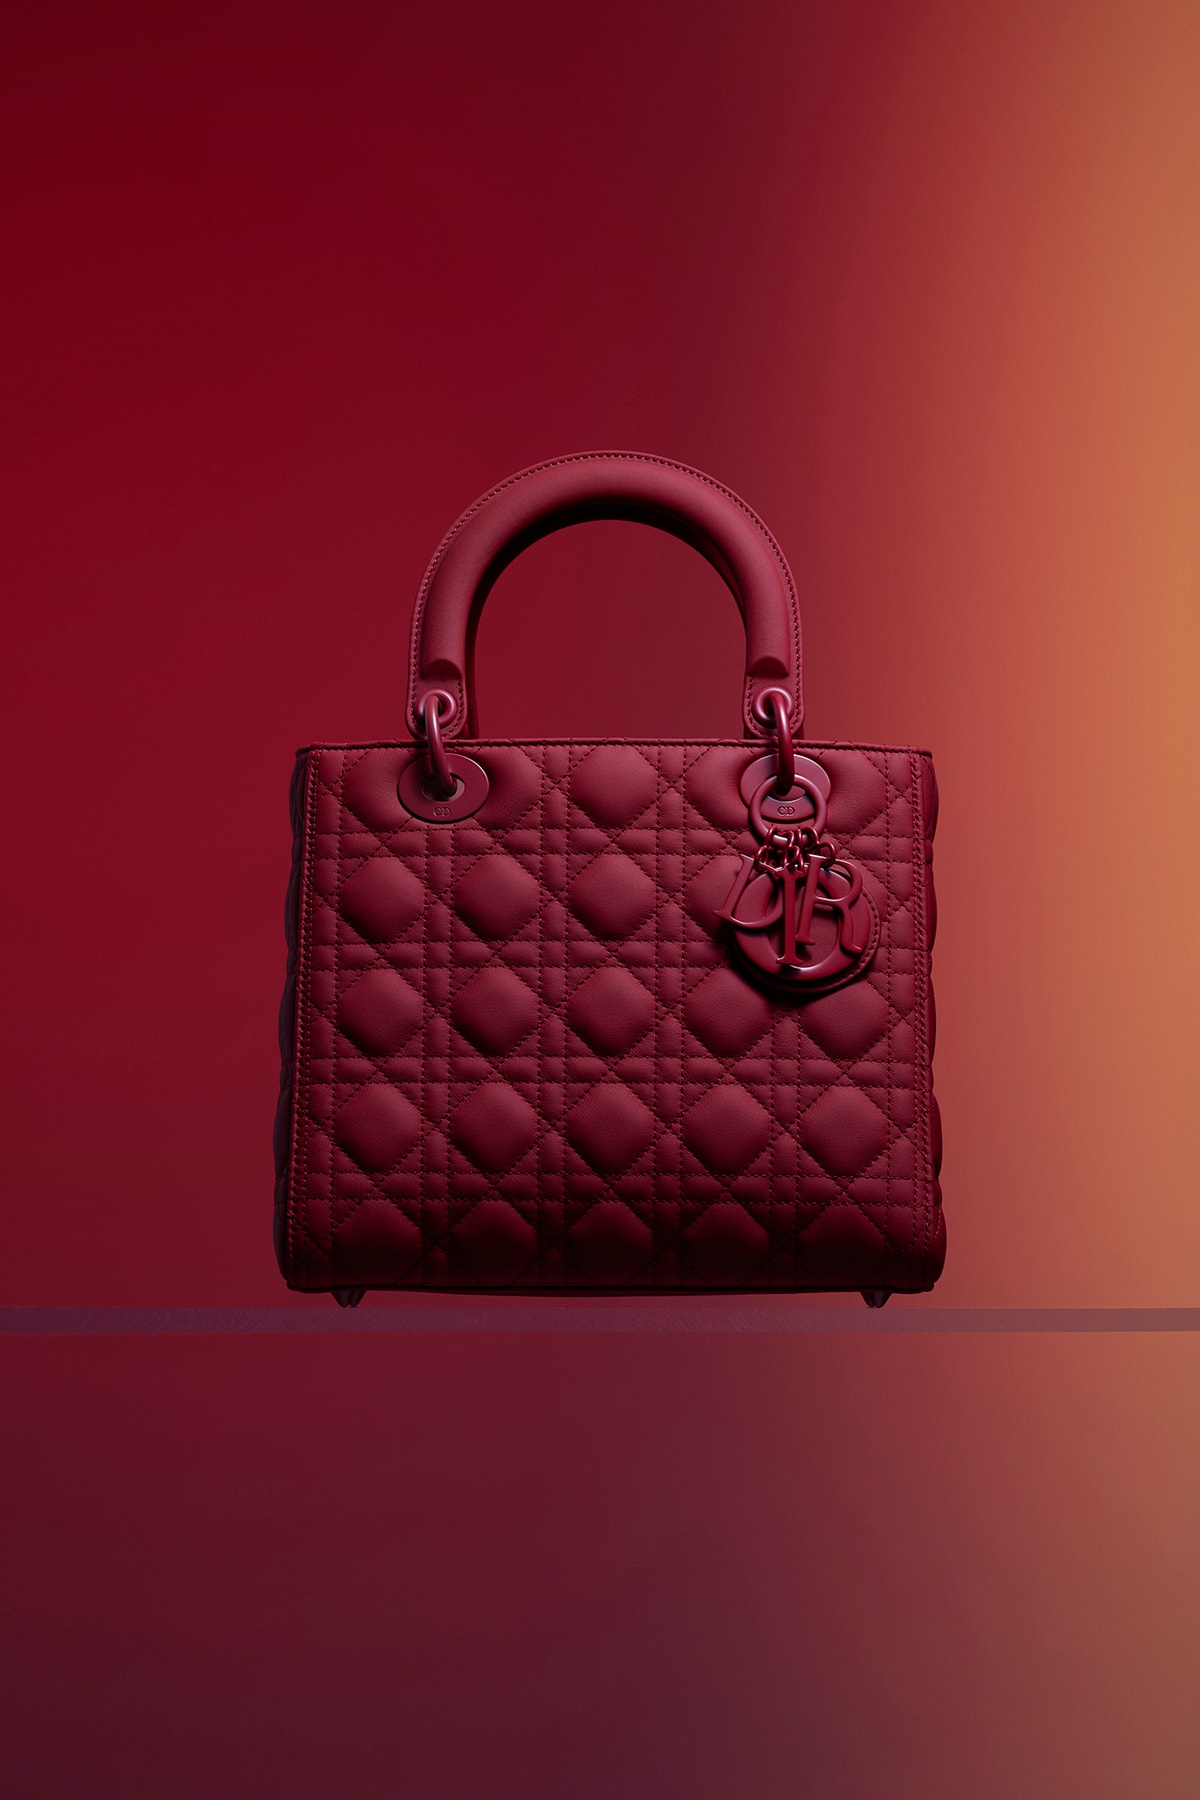 Dior Ultra-Matte Collection Bags Lady Dior Red